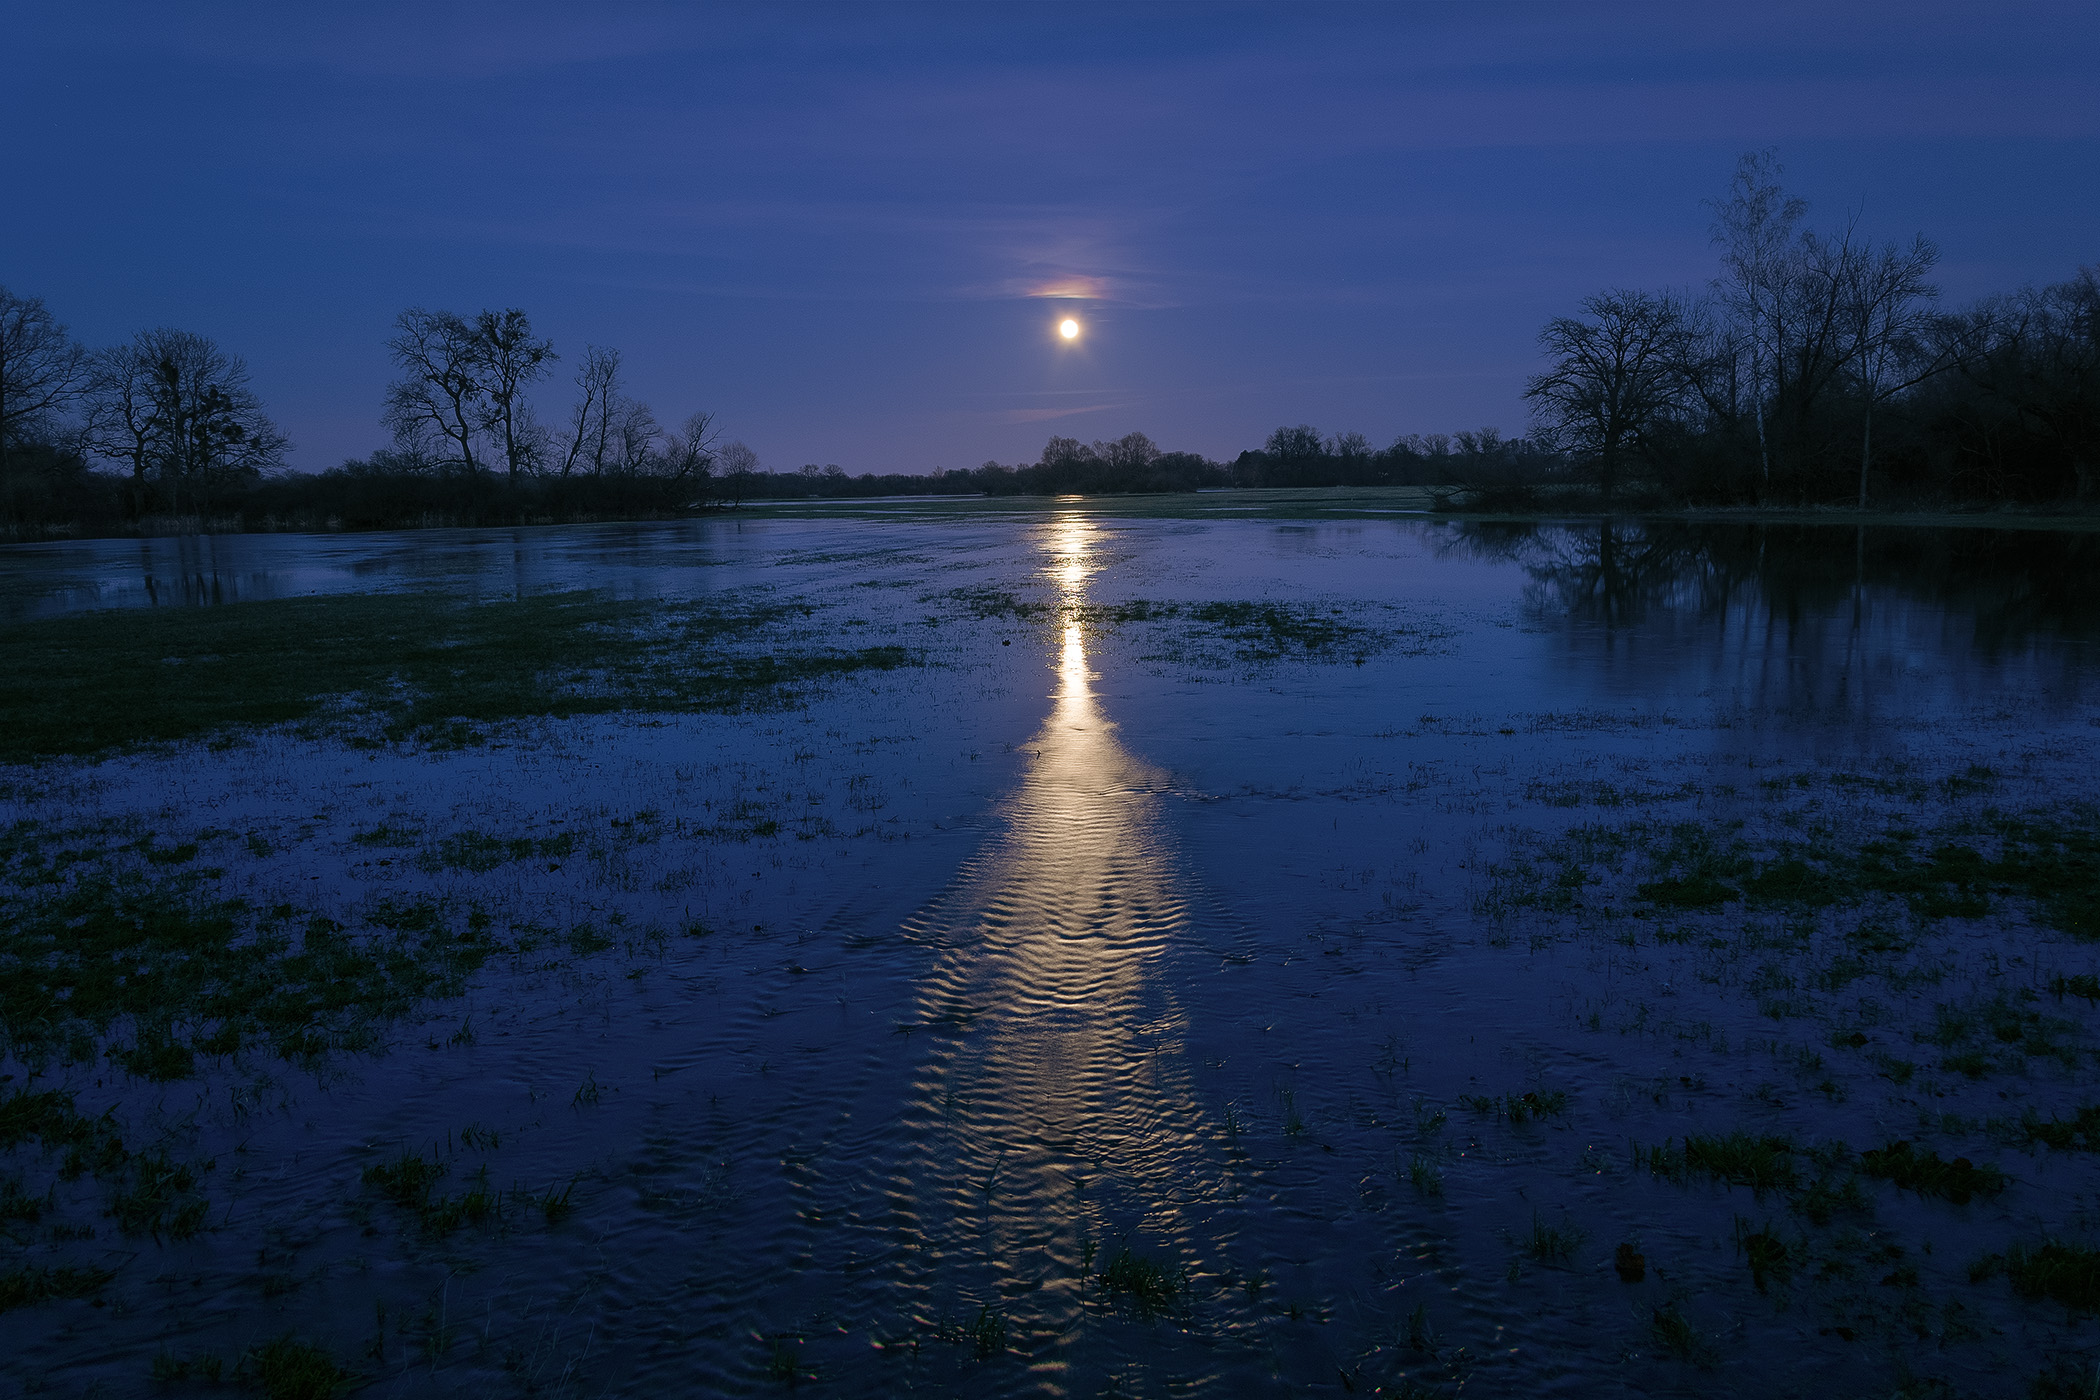 Floods with Full Moon